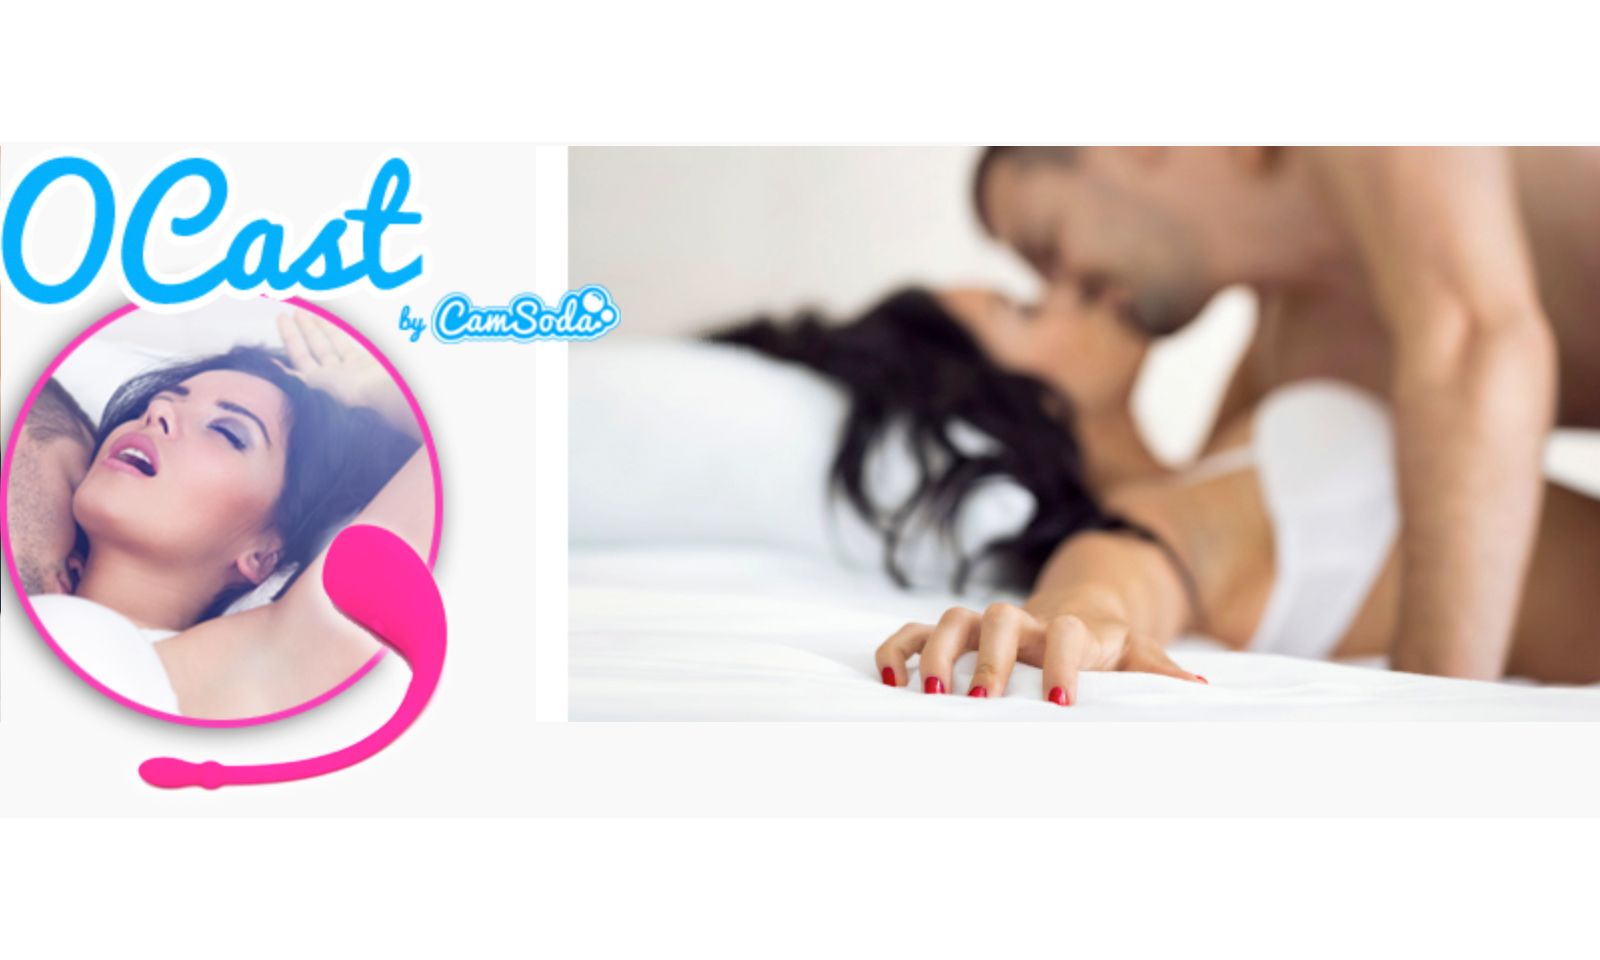 CamSoda’s Latest App, O-Cast, Connects People in Unique Ways